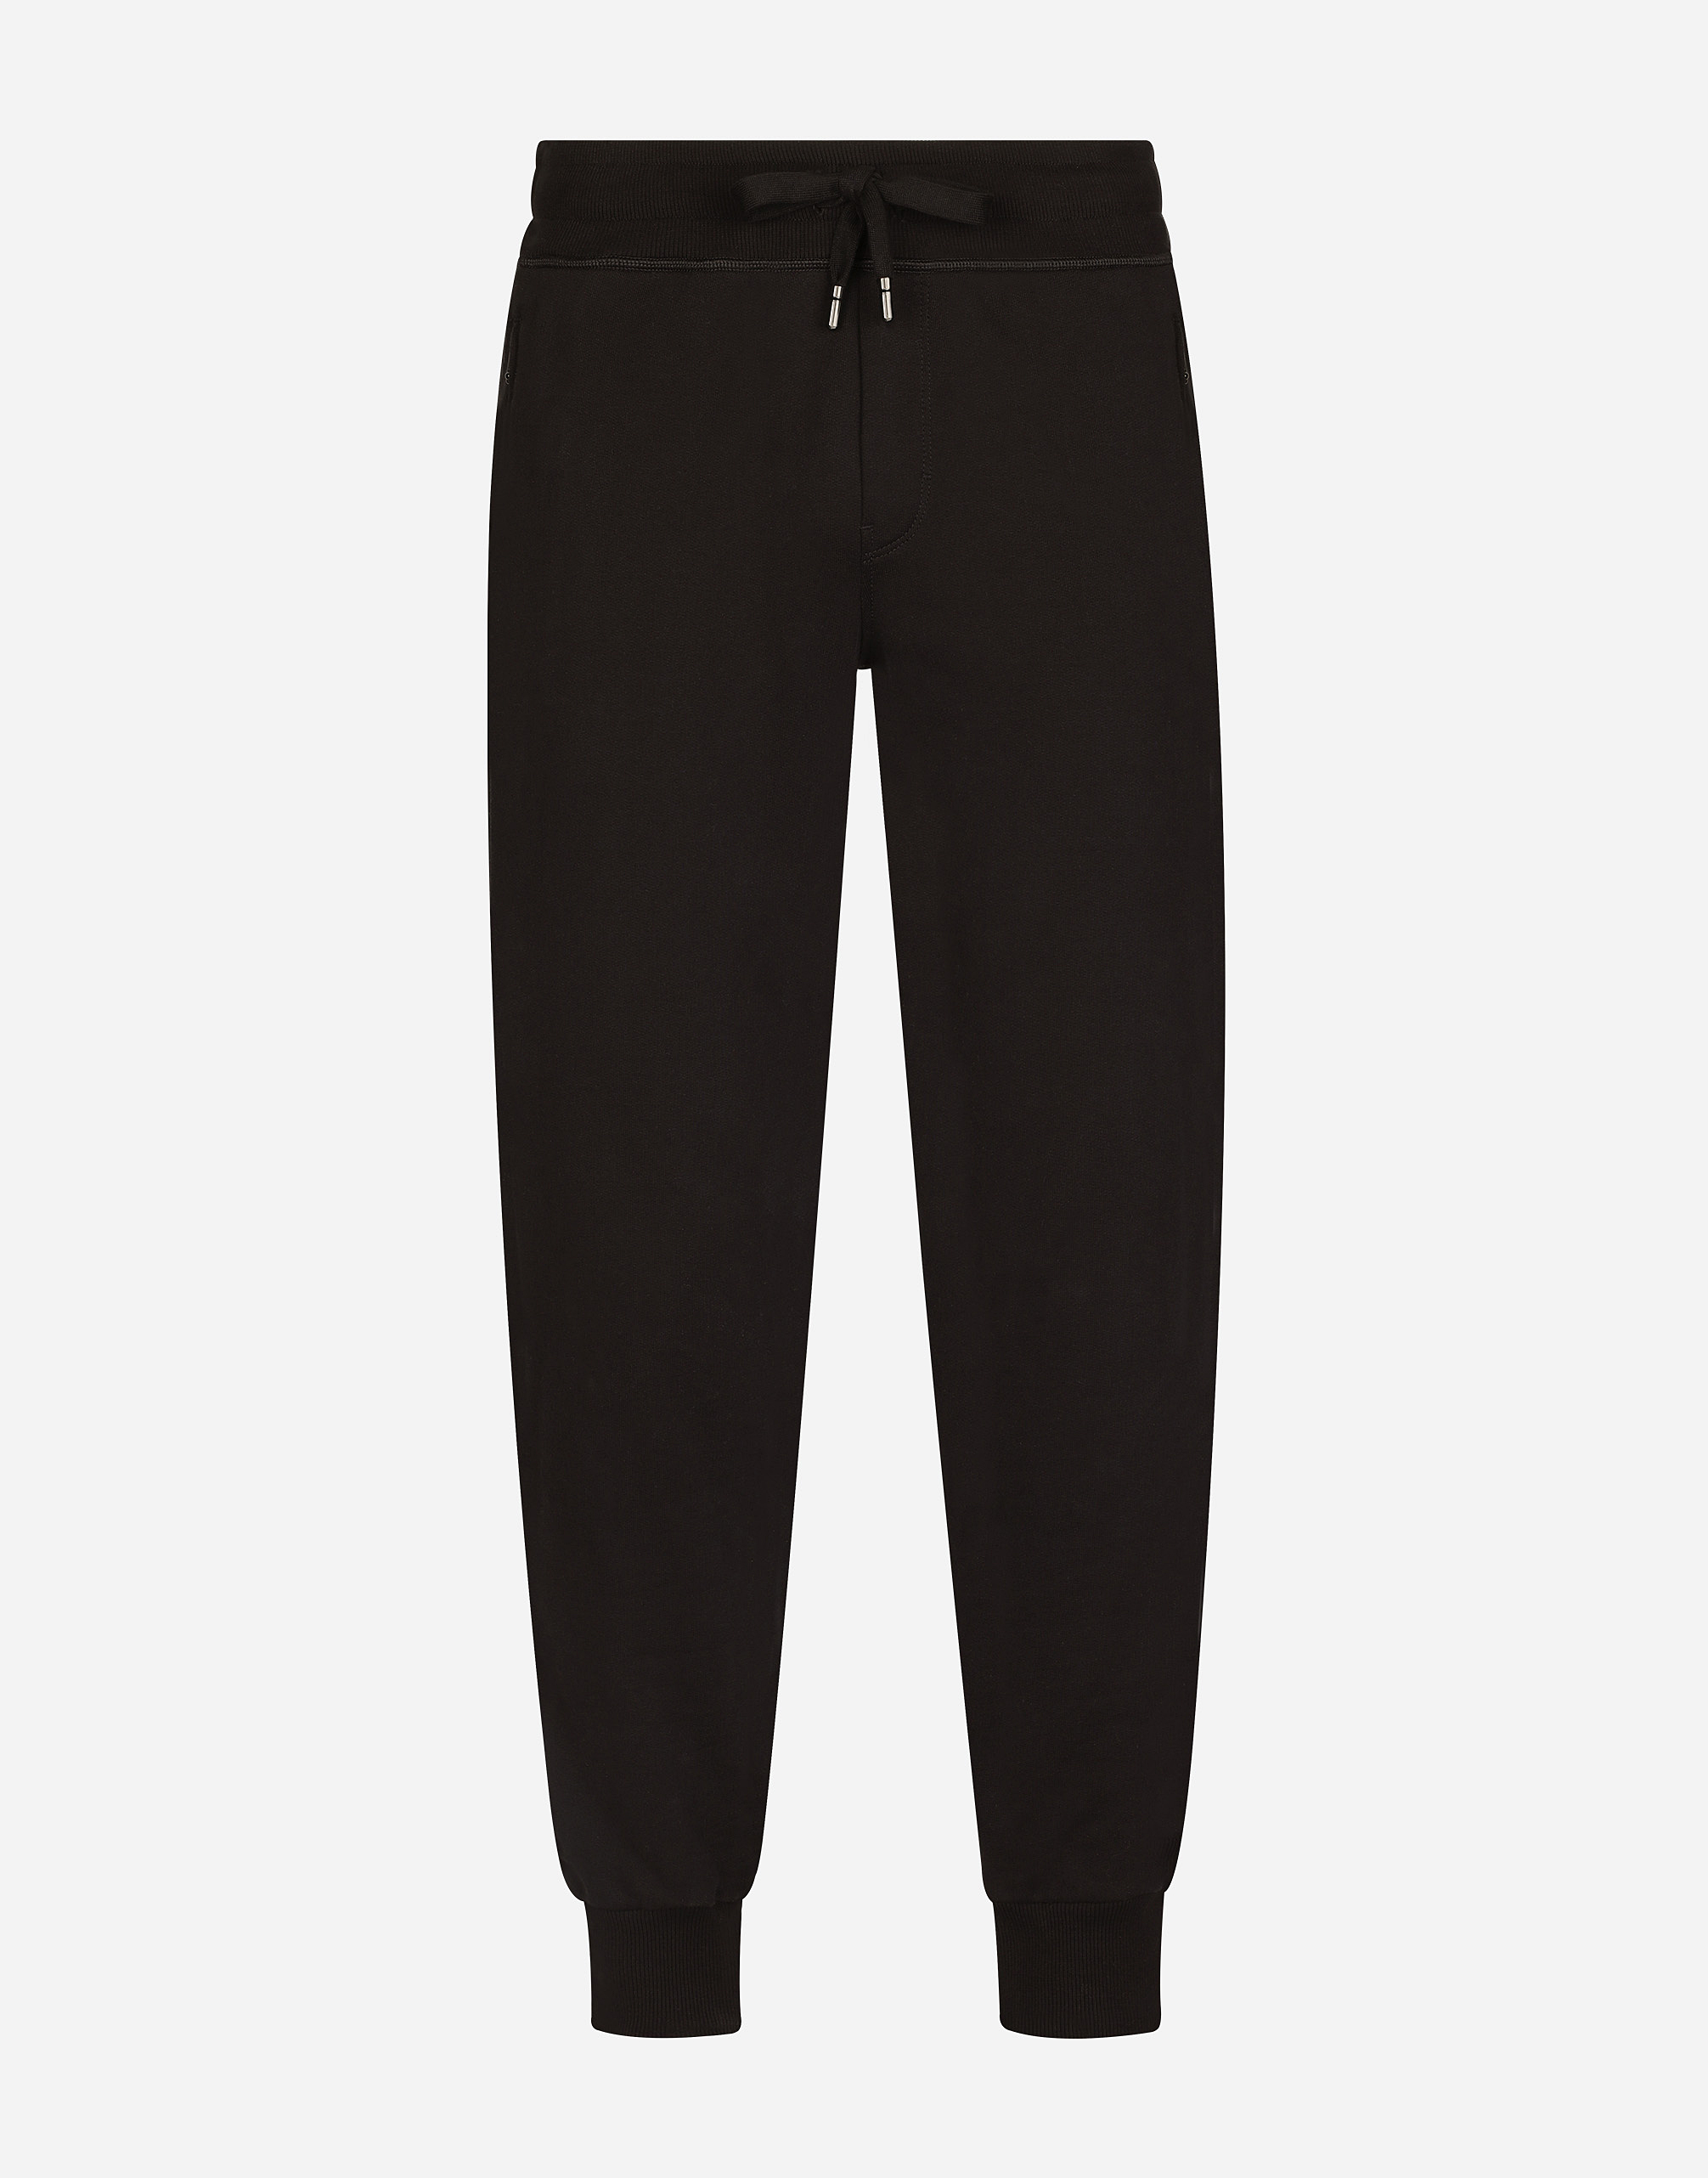 Jersey jogging pants with branded tag in Black